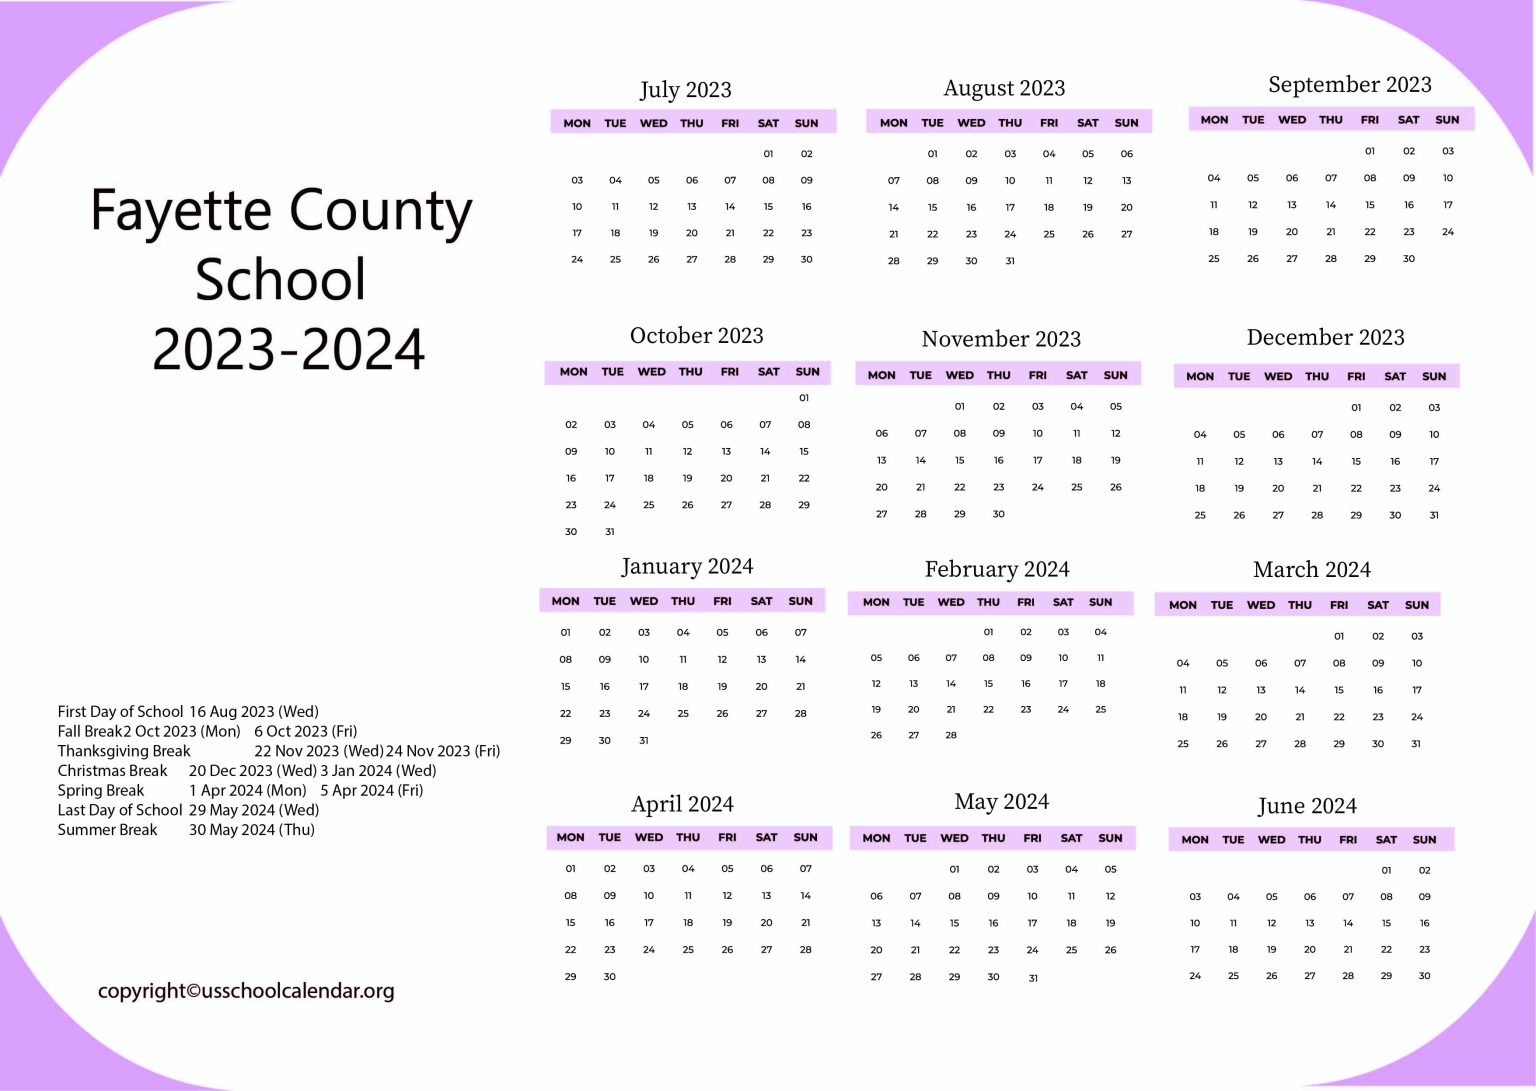 fayette-county-school-calendar-with-holidays-2023-2024